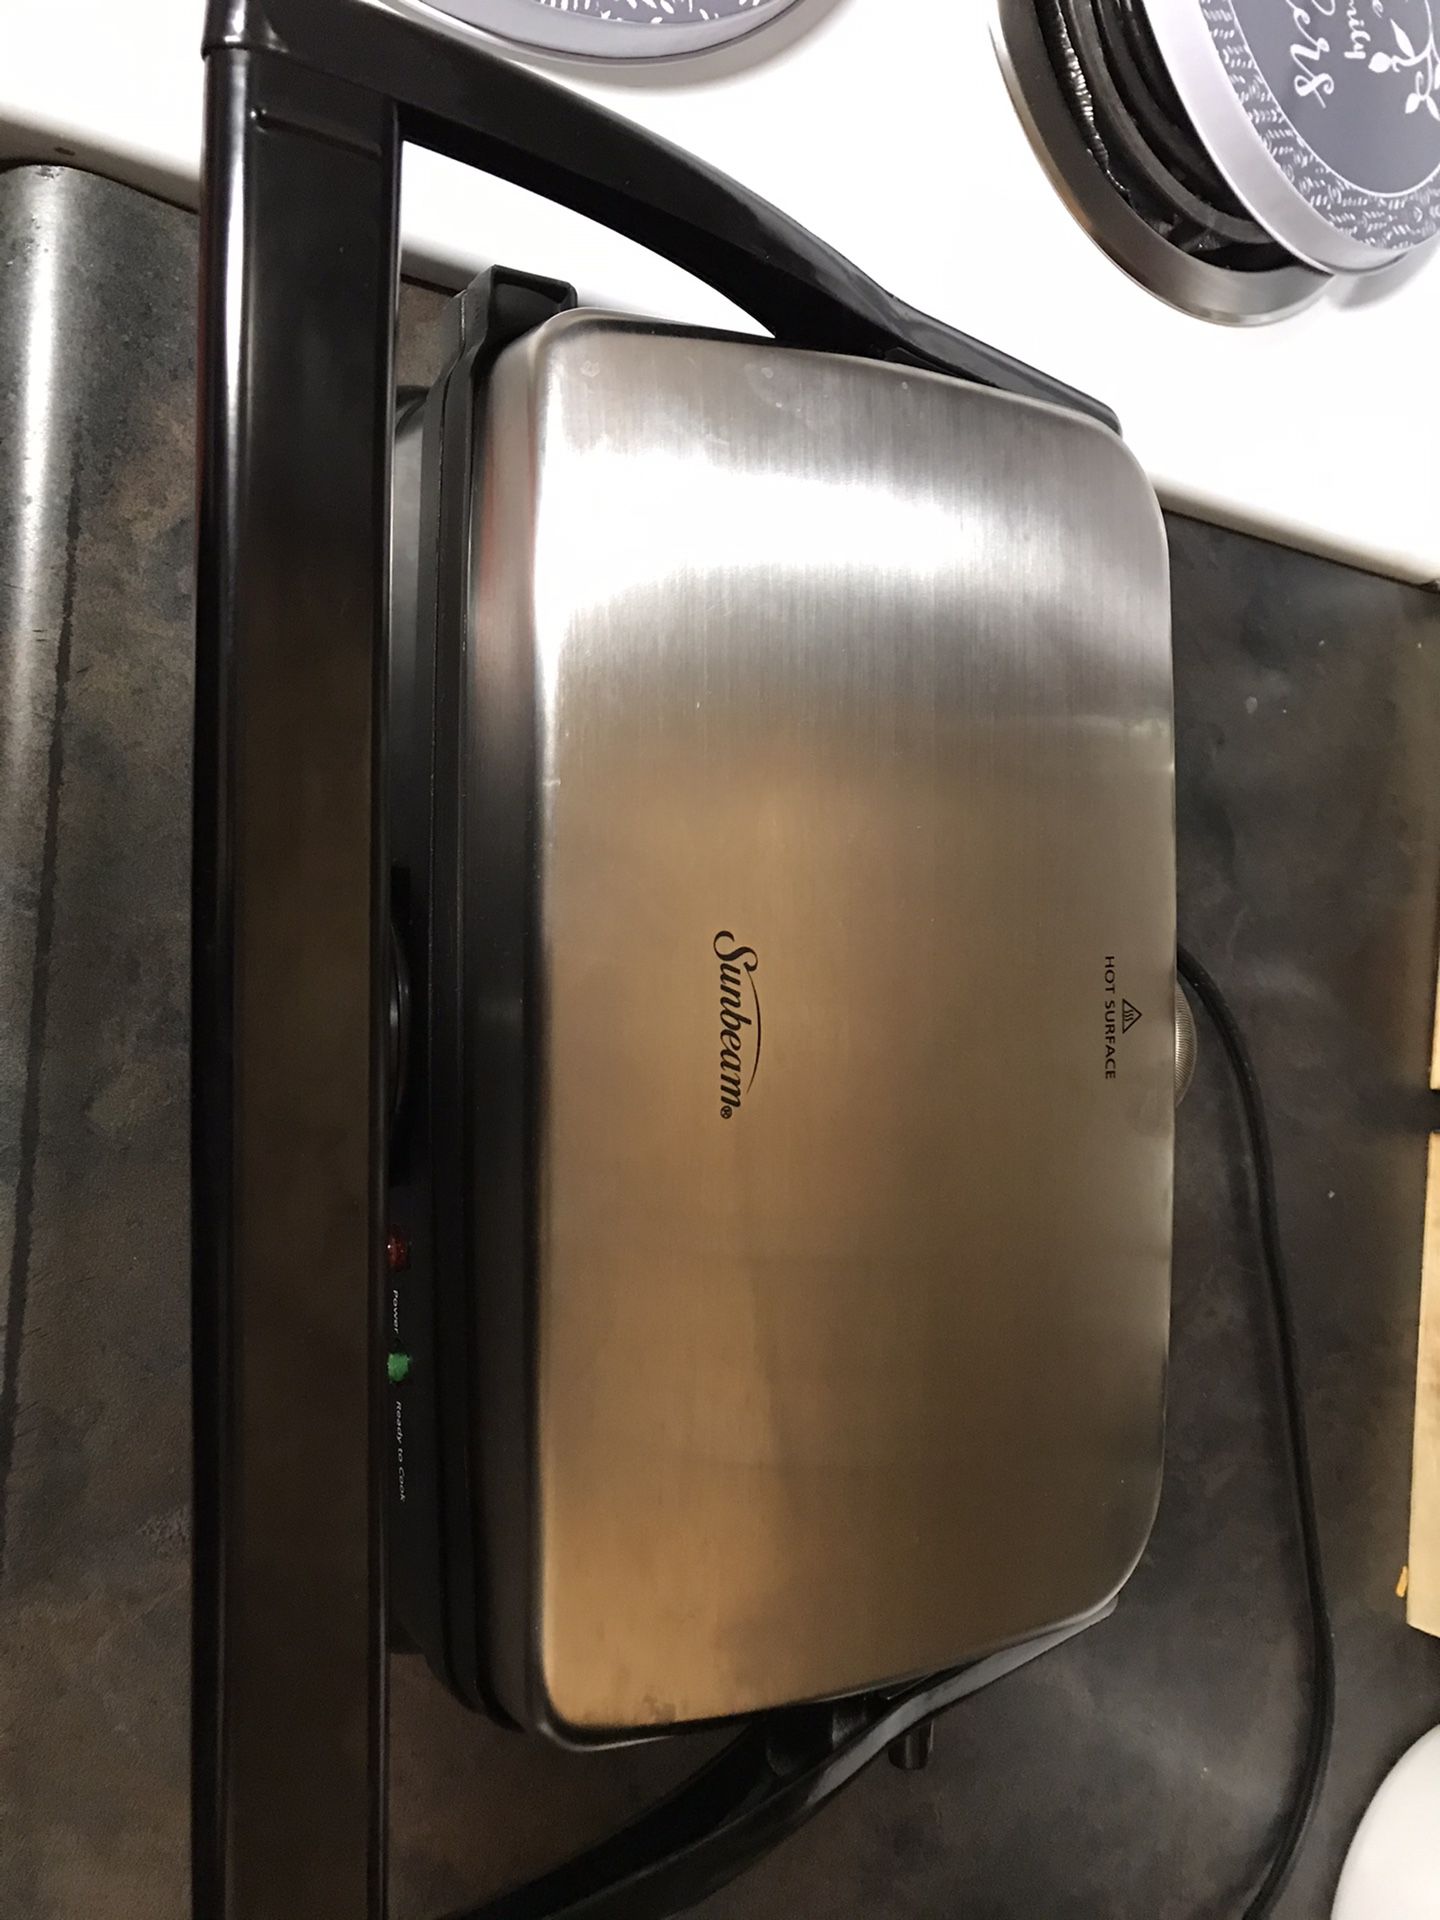 Sand which panini maker